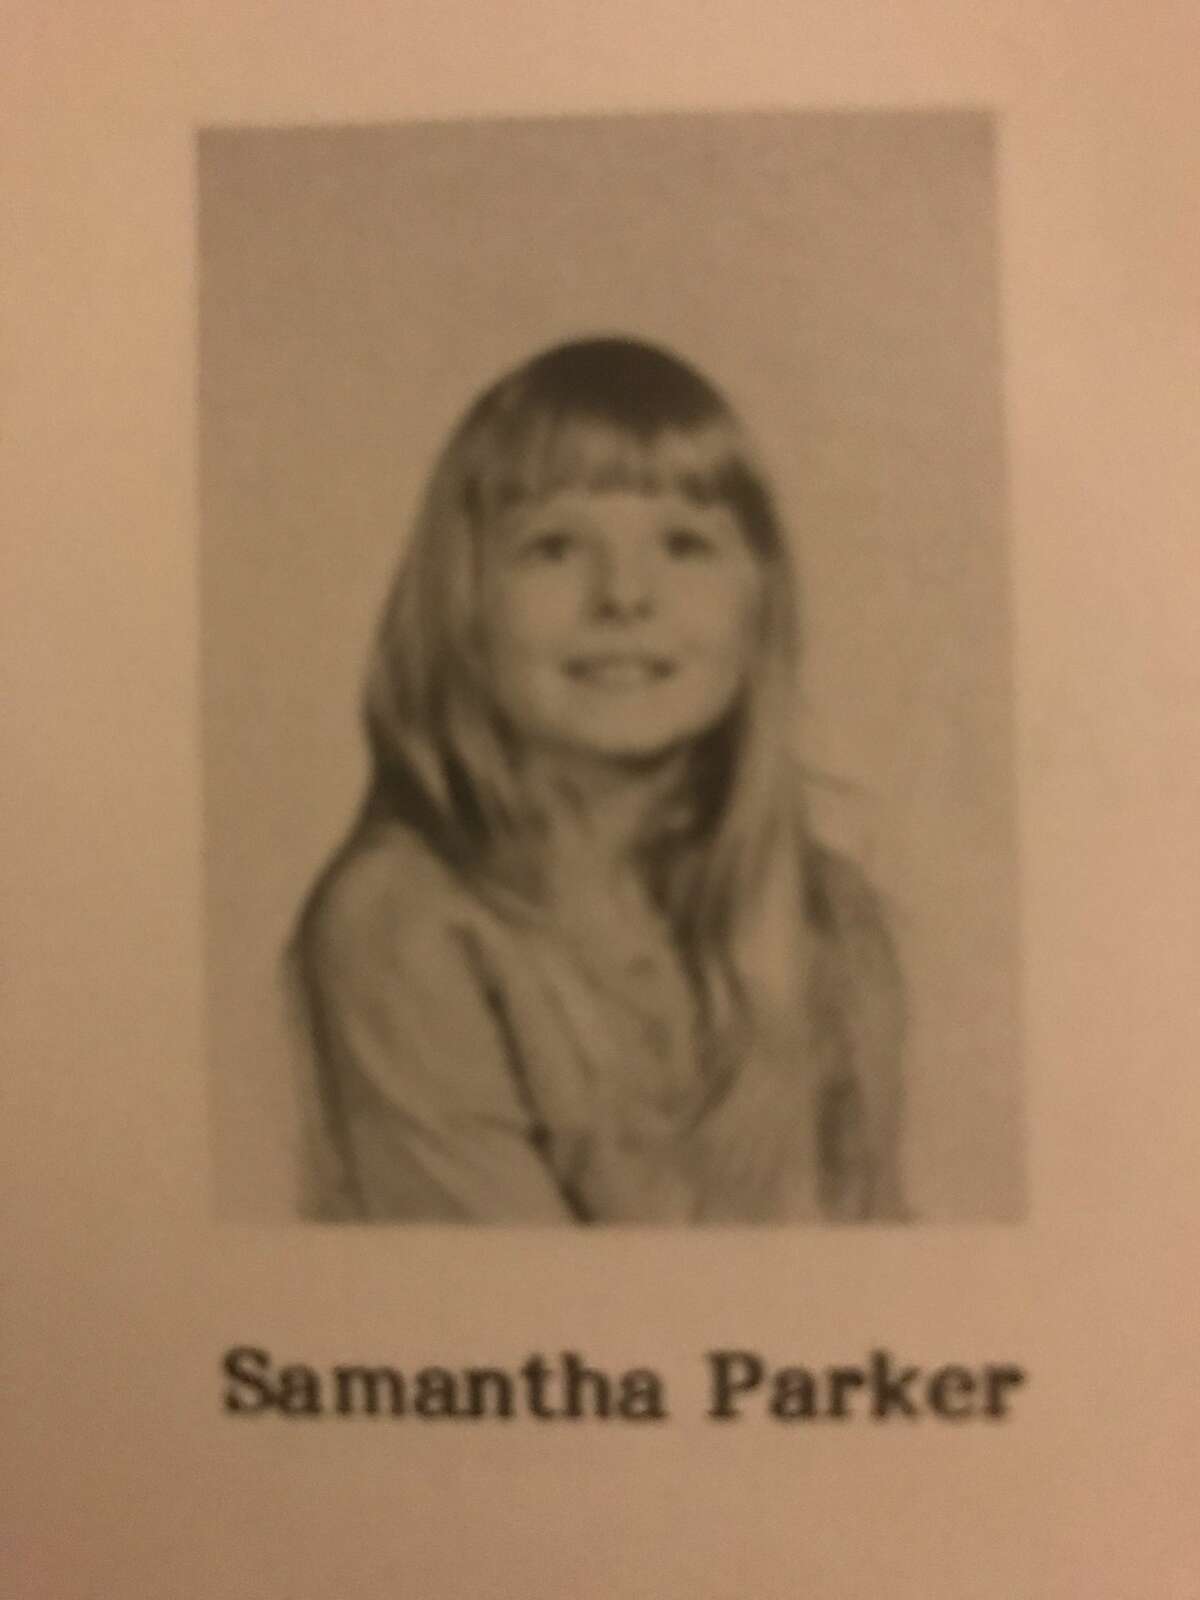 1. I LOVE my name Samantha, however I am most well-known as ‘Sam’.